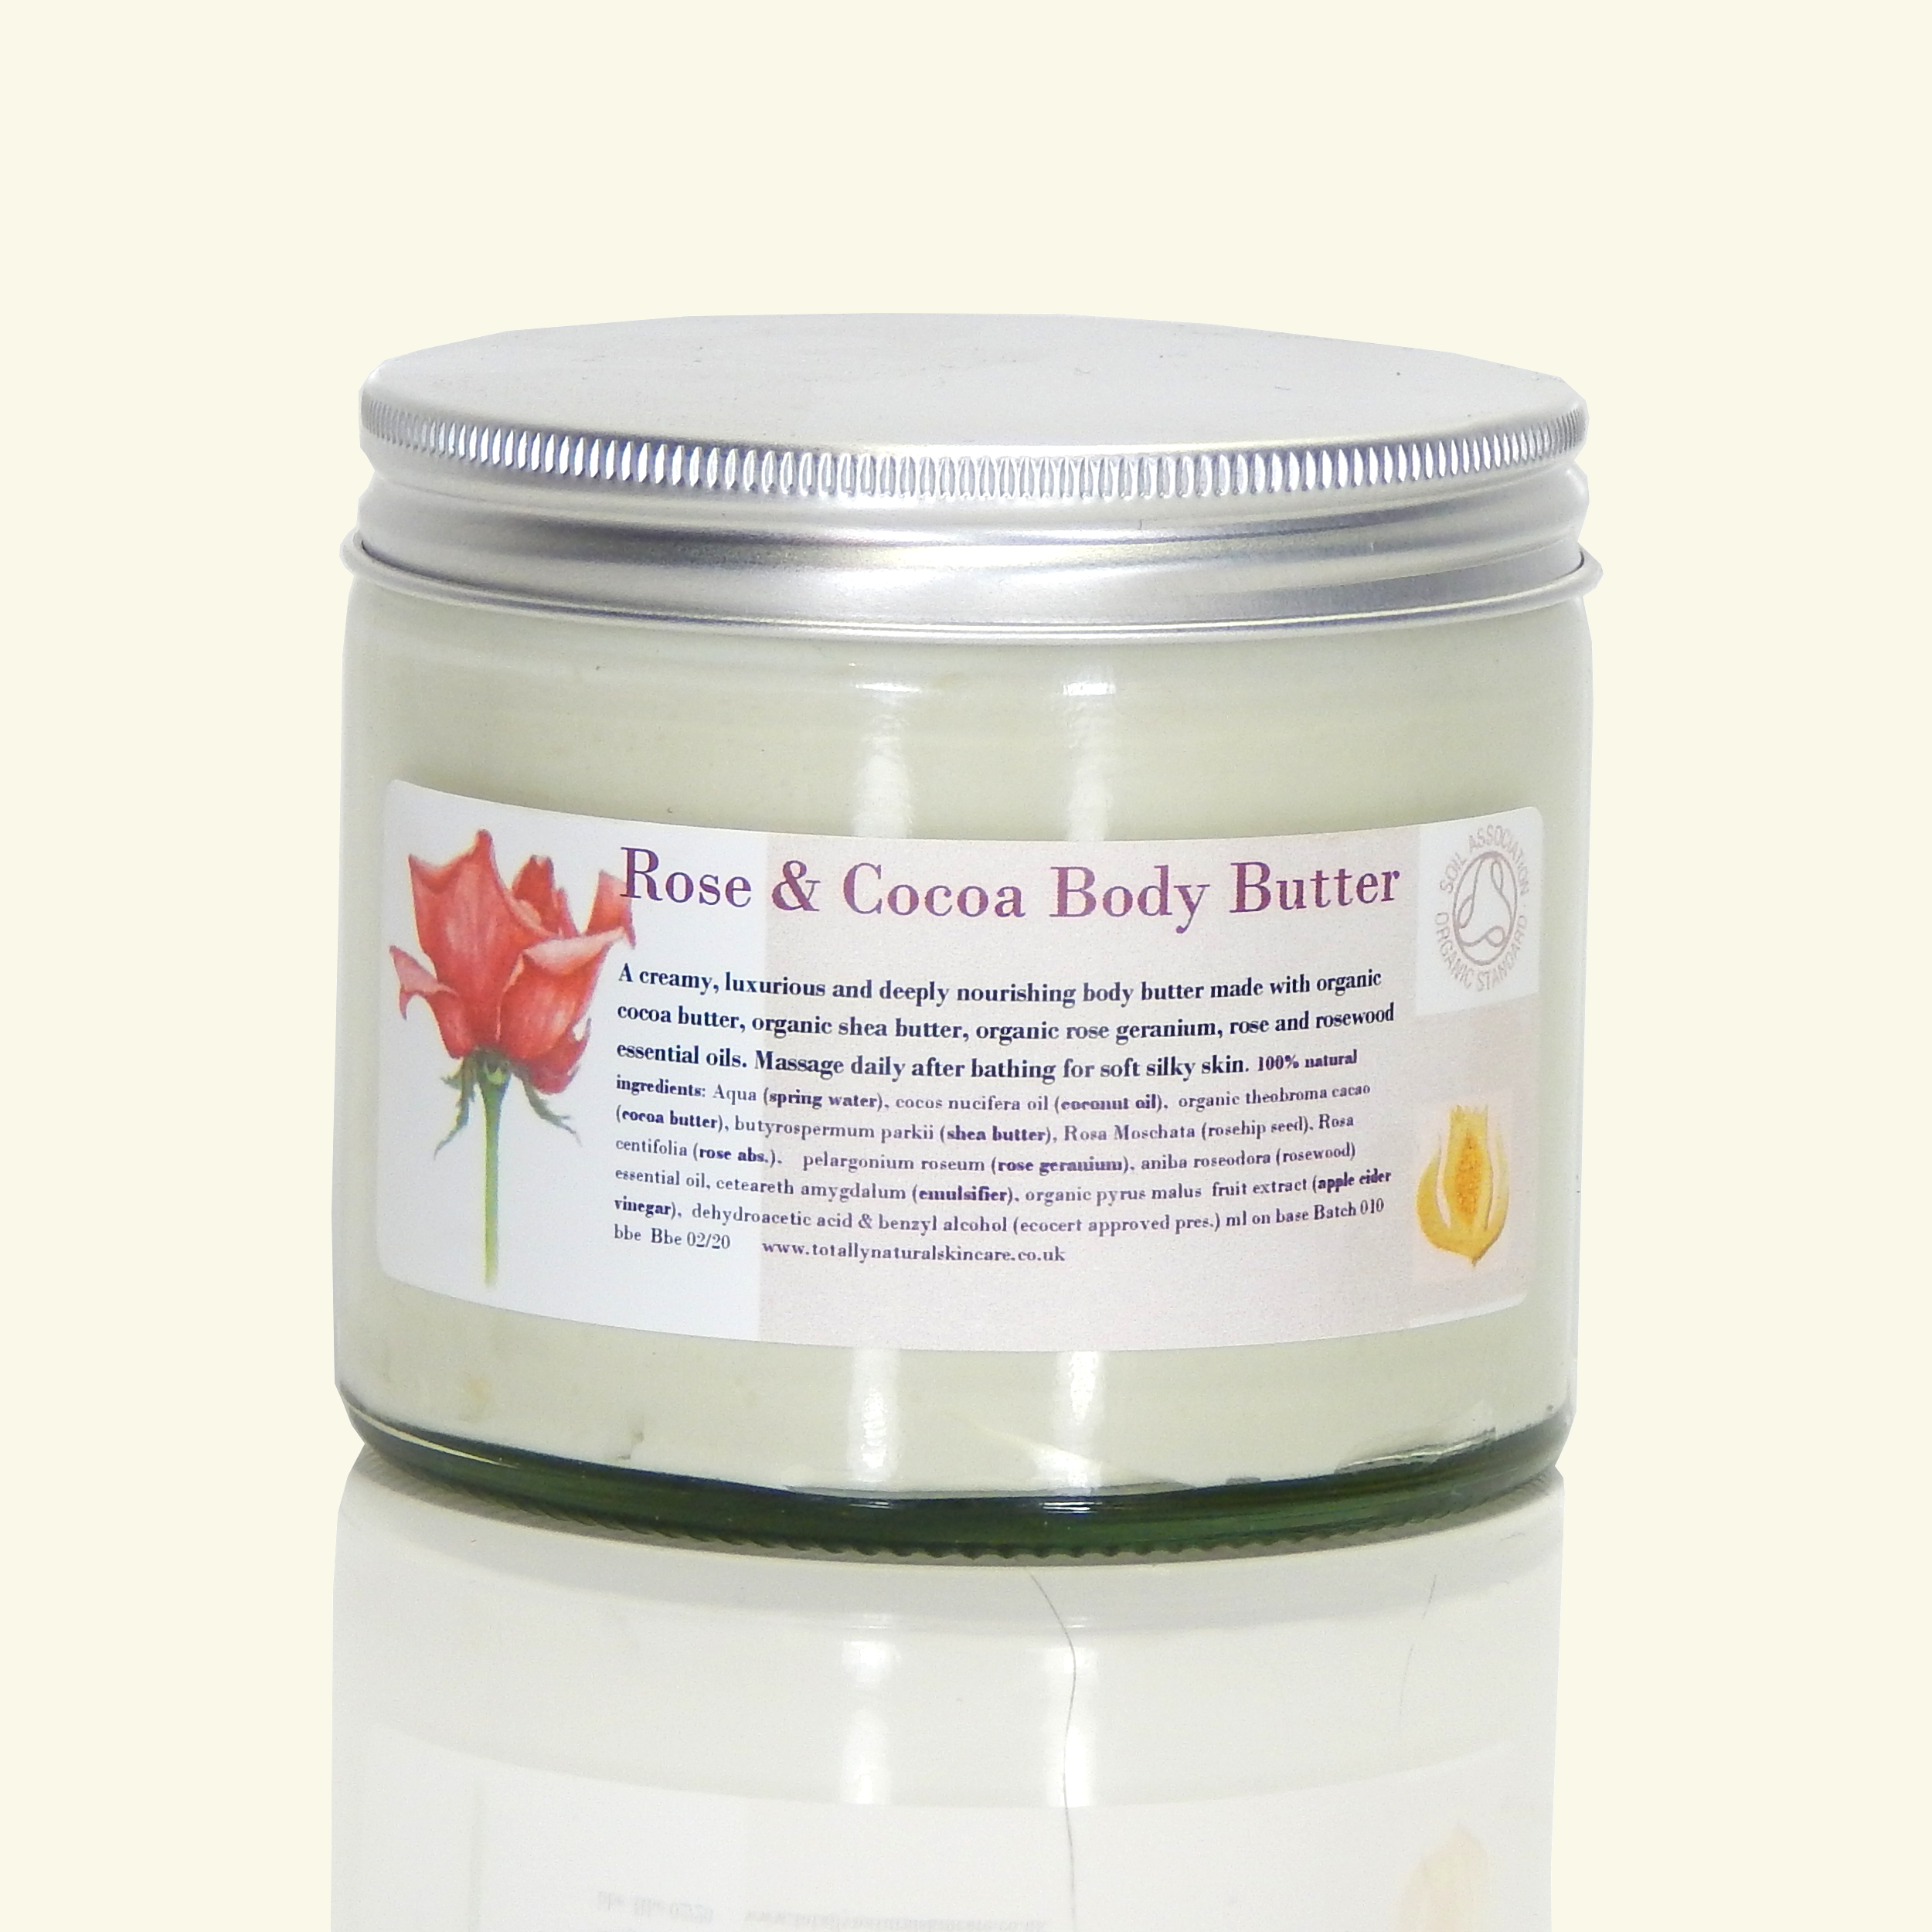 Rose & Cocoa Body Butter